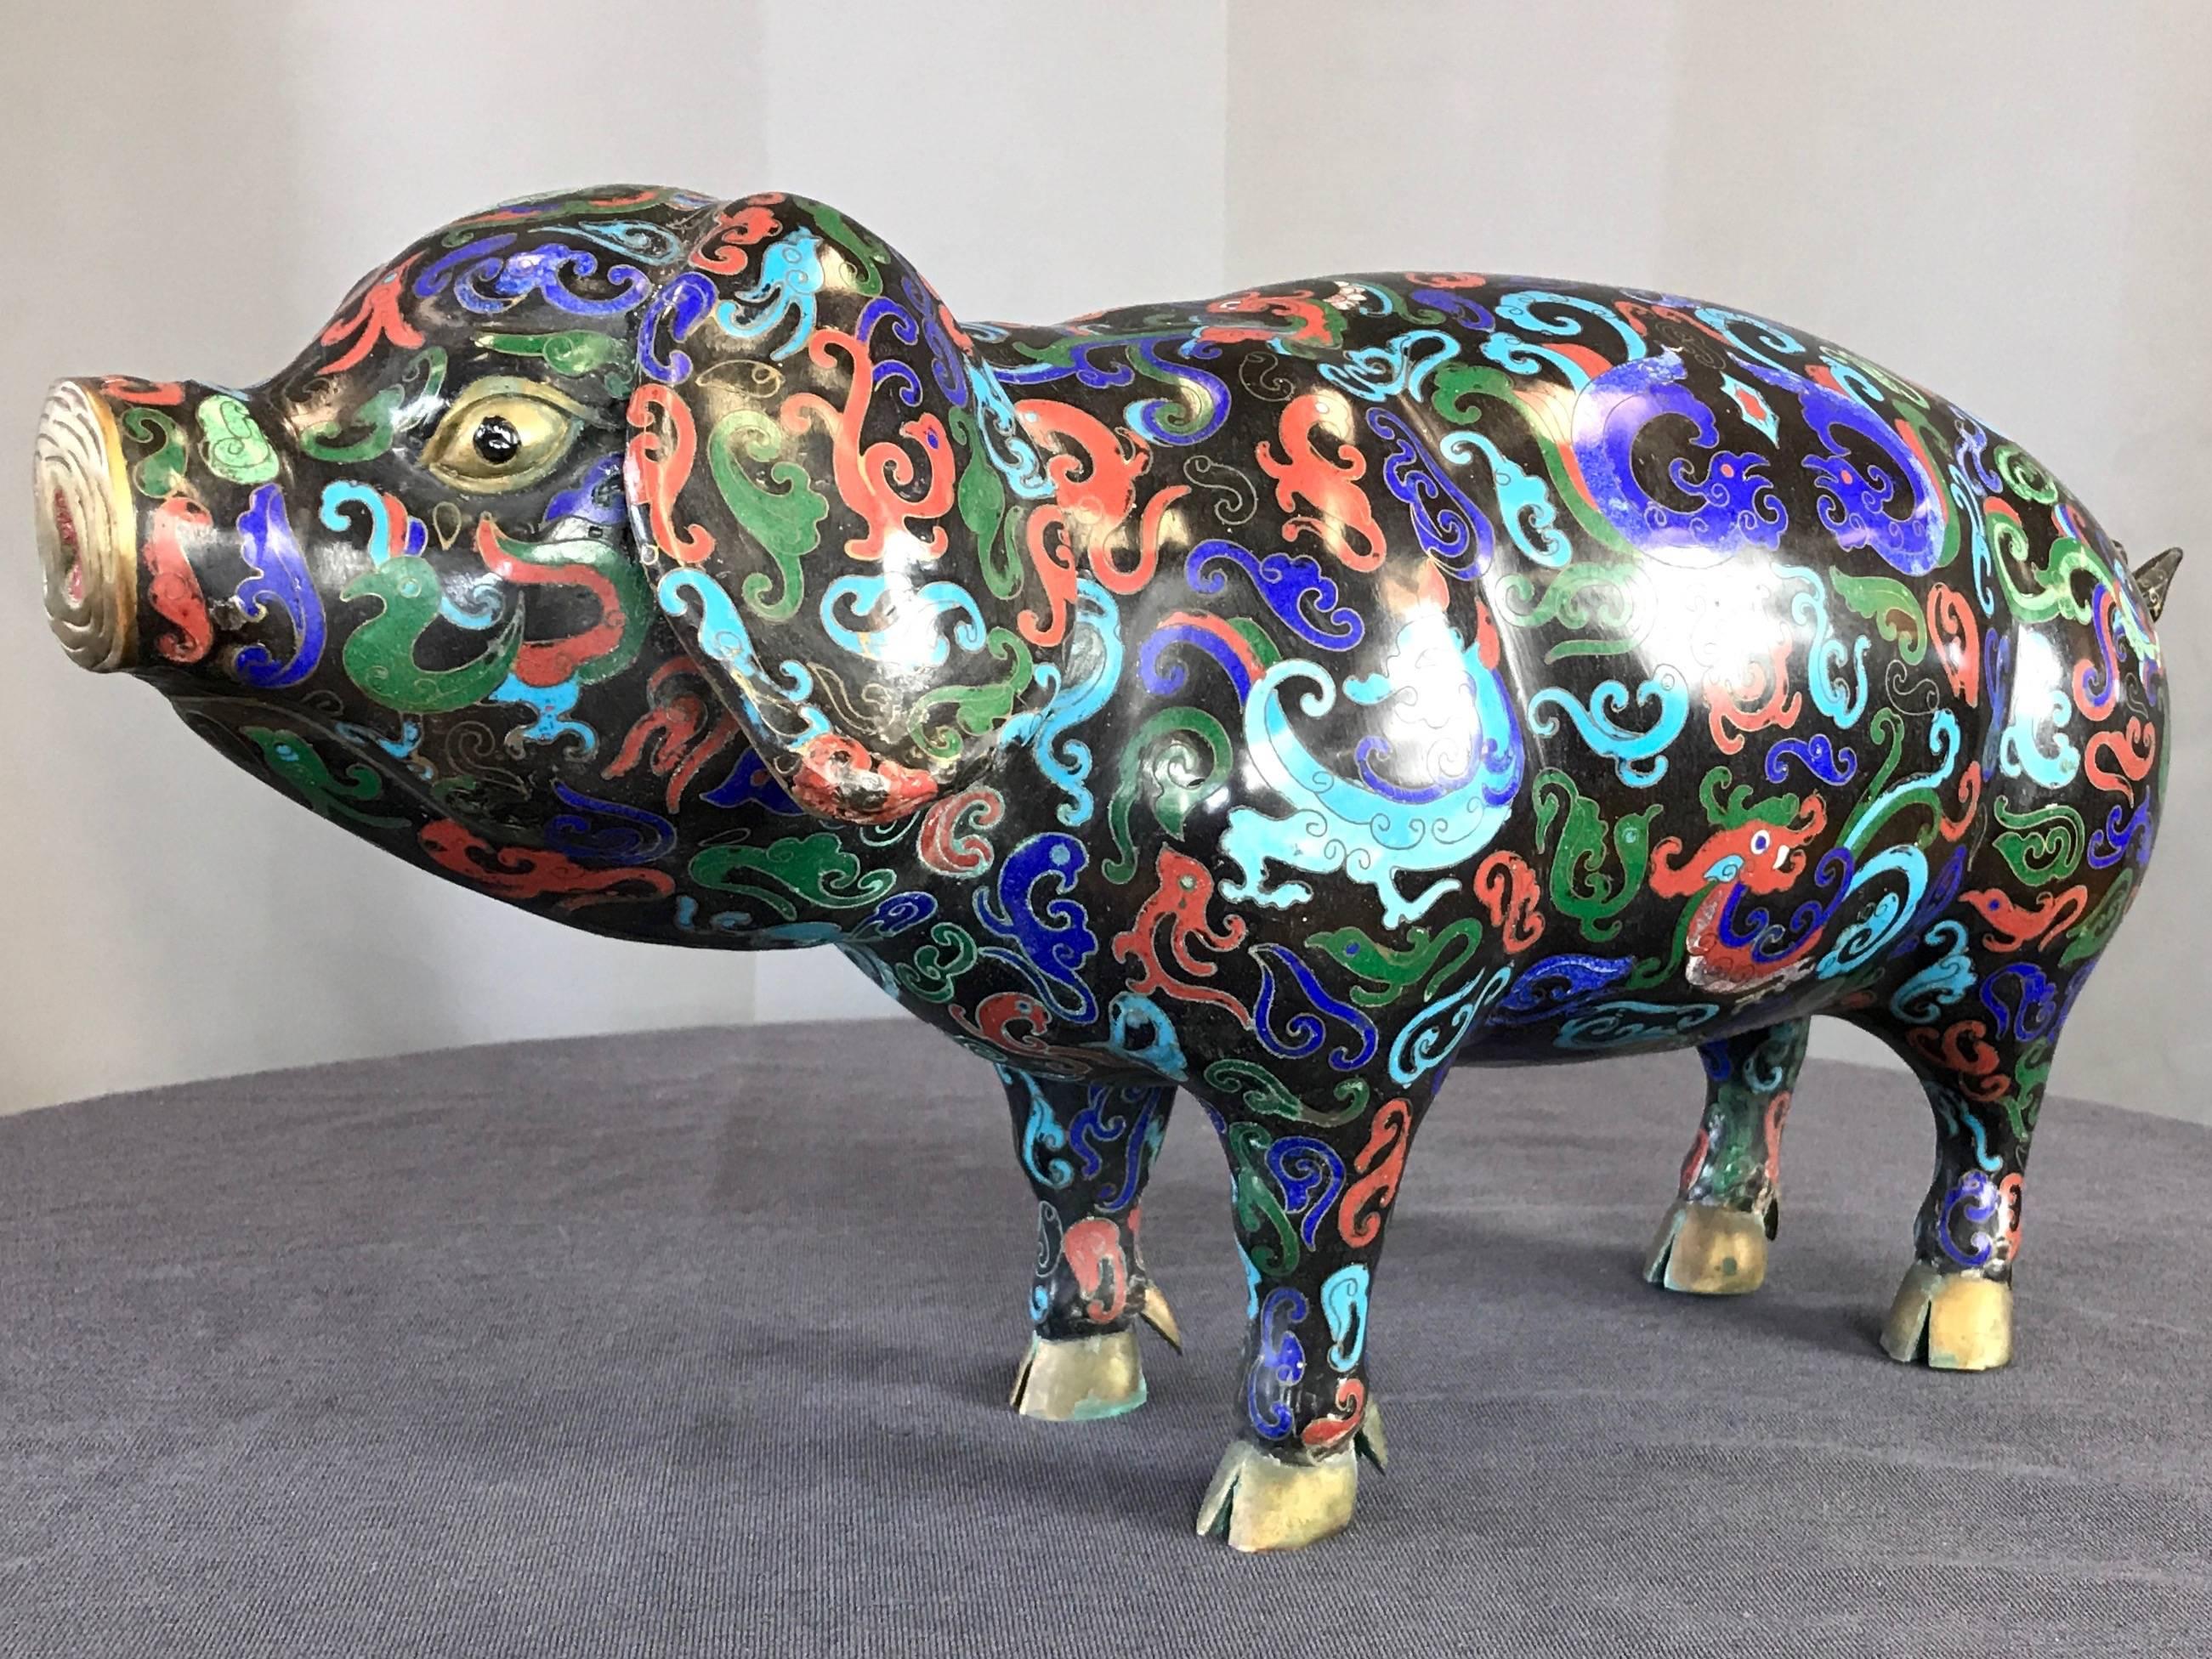 An uncommon extra large Chinese cloisonné pig, circa 1950s.

This two-foot-long, colorfully enameled, proudly posed piglet is both lifesize and full of life. Covered nose-to-tail in artfully executed and vibrant swirling decorations that include